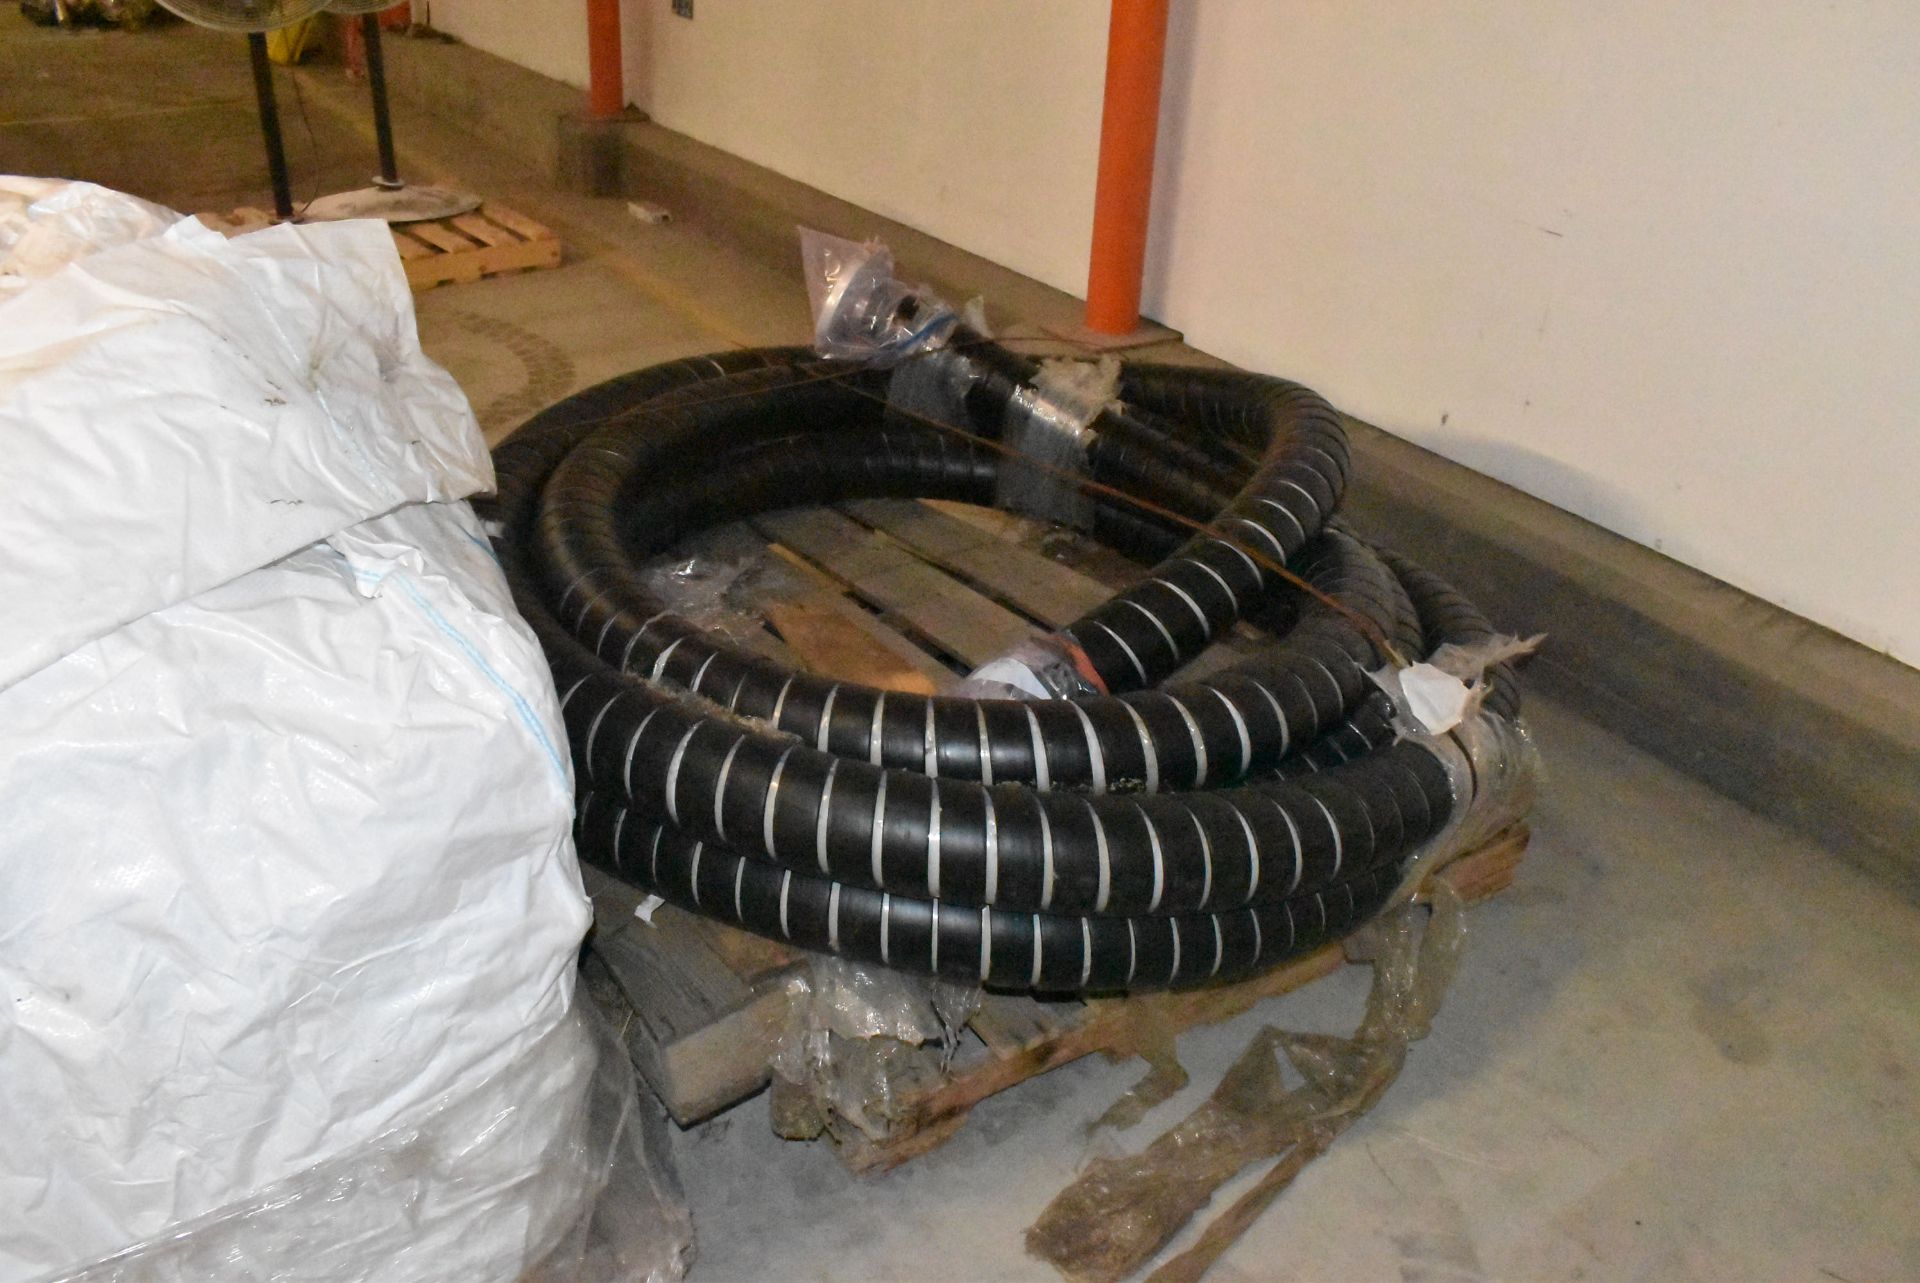 LOT/ CONTENTS OF PALLETS CONSISTING OF GAYLORD BAGS, HOSE AND STAINLESS STEEL CLAMPS [RIGGING FEE - Image 5 of 6